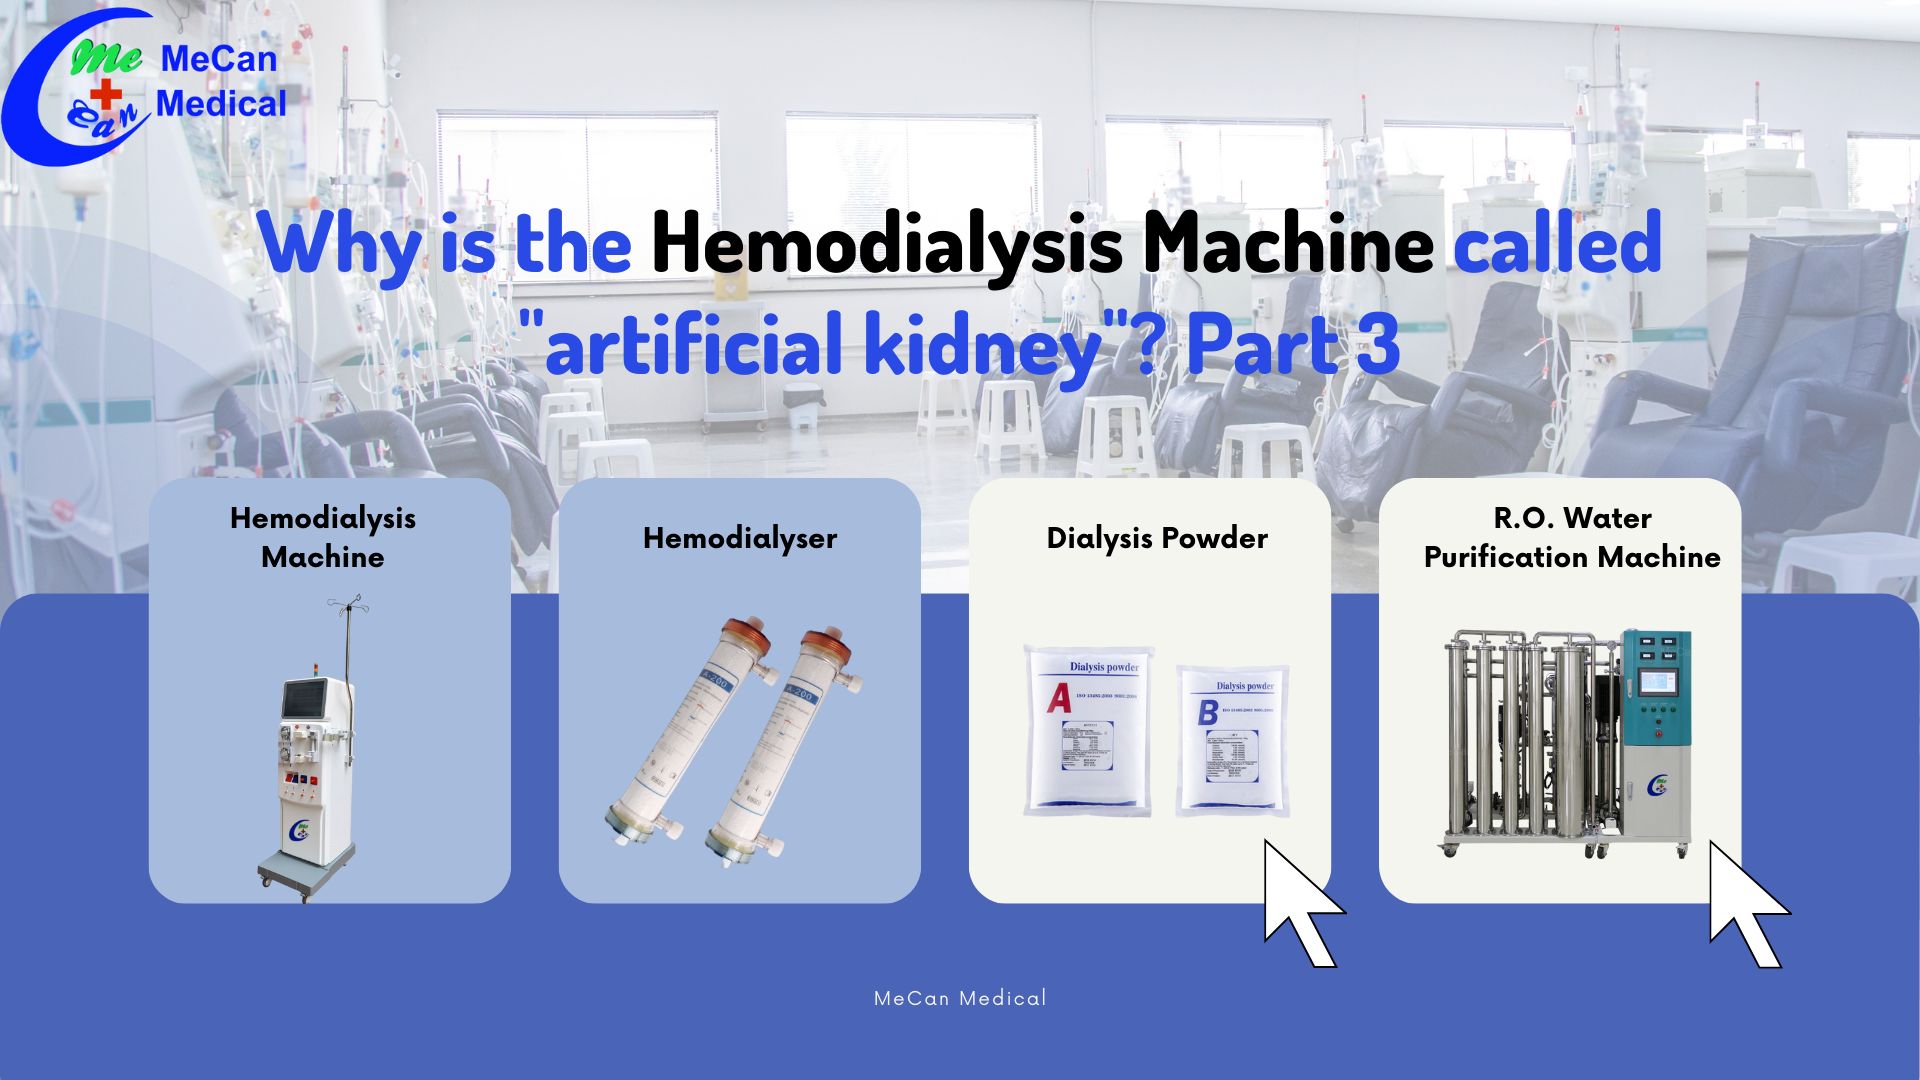 Part 3 Why is the Hemodialysis Machine called "artificial kidney"? 